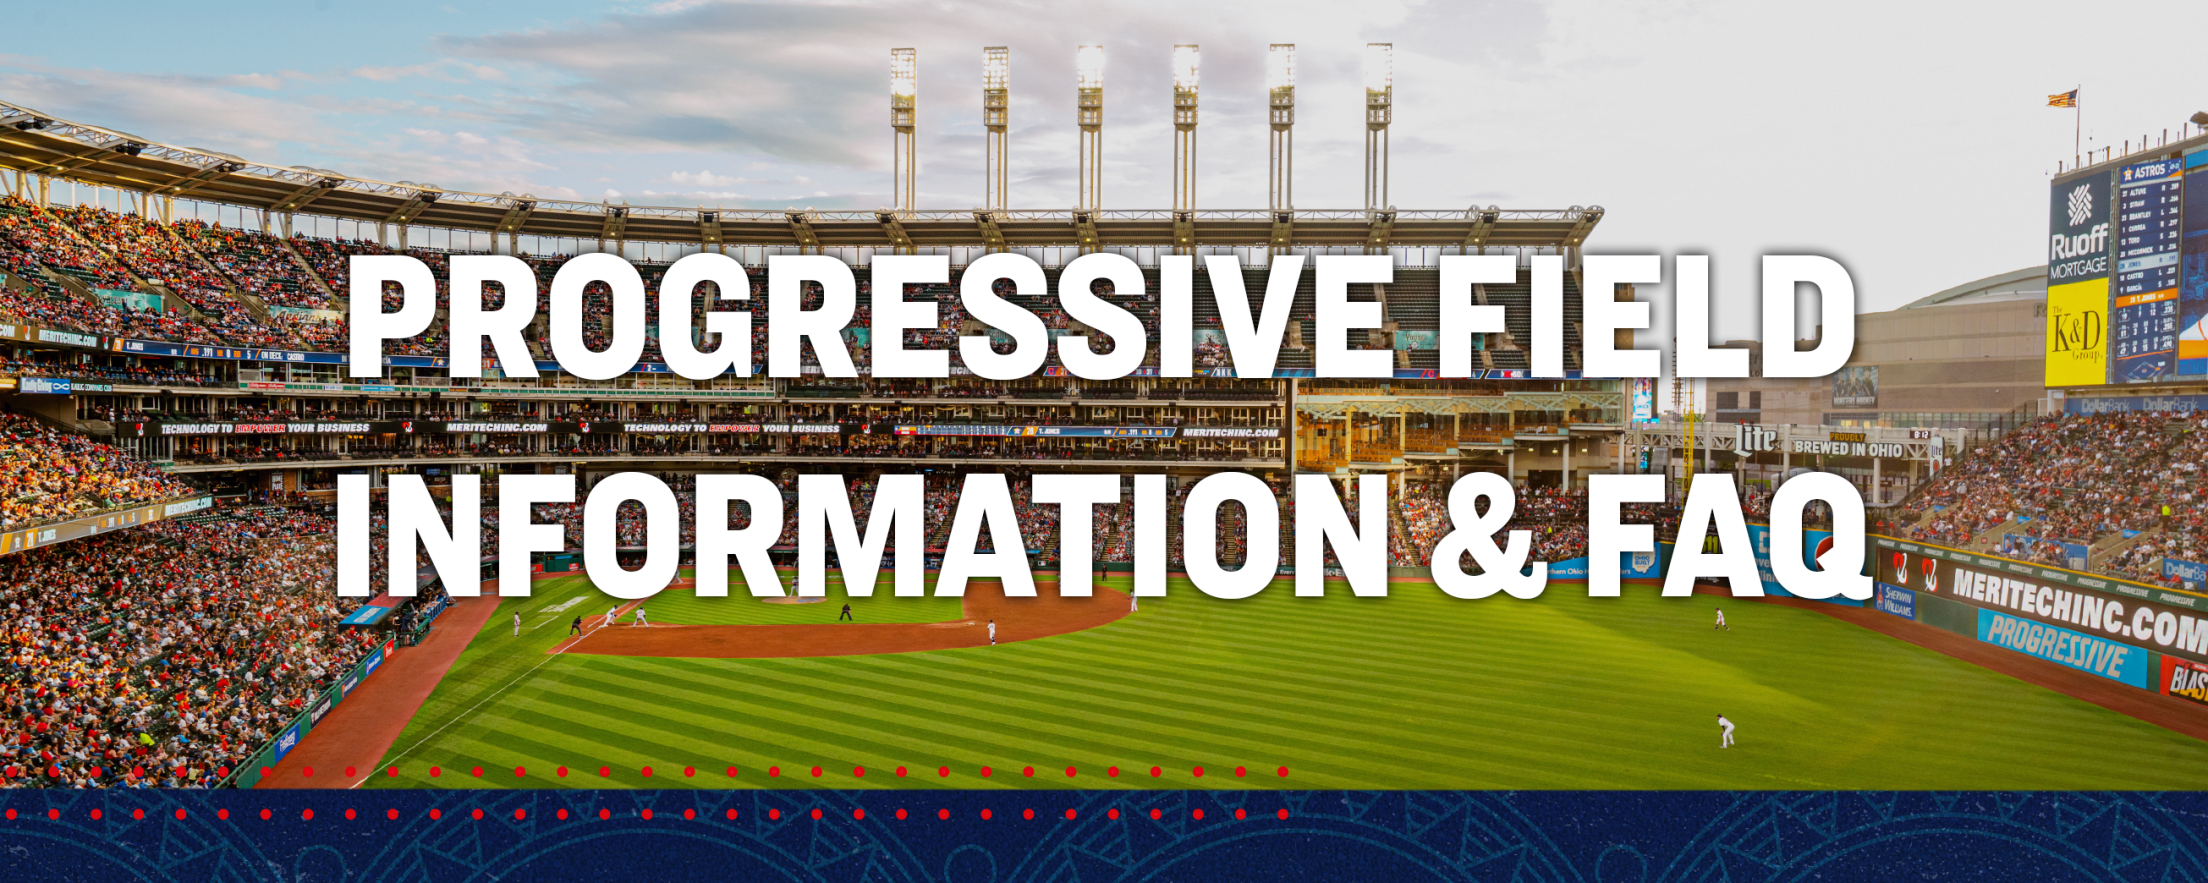 What to expect at Progressive Field this season